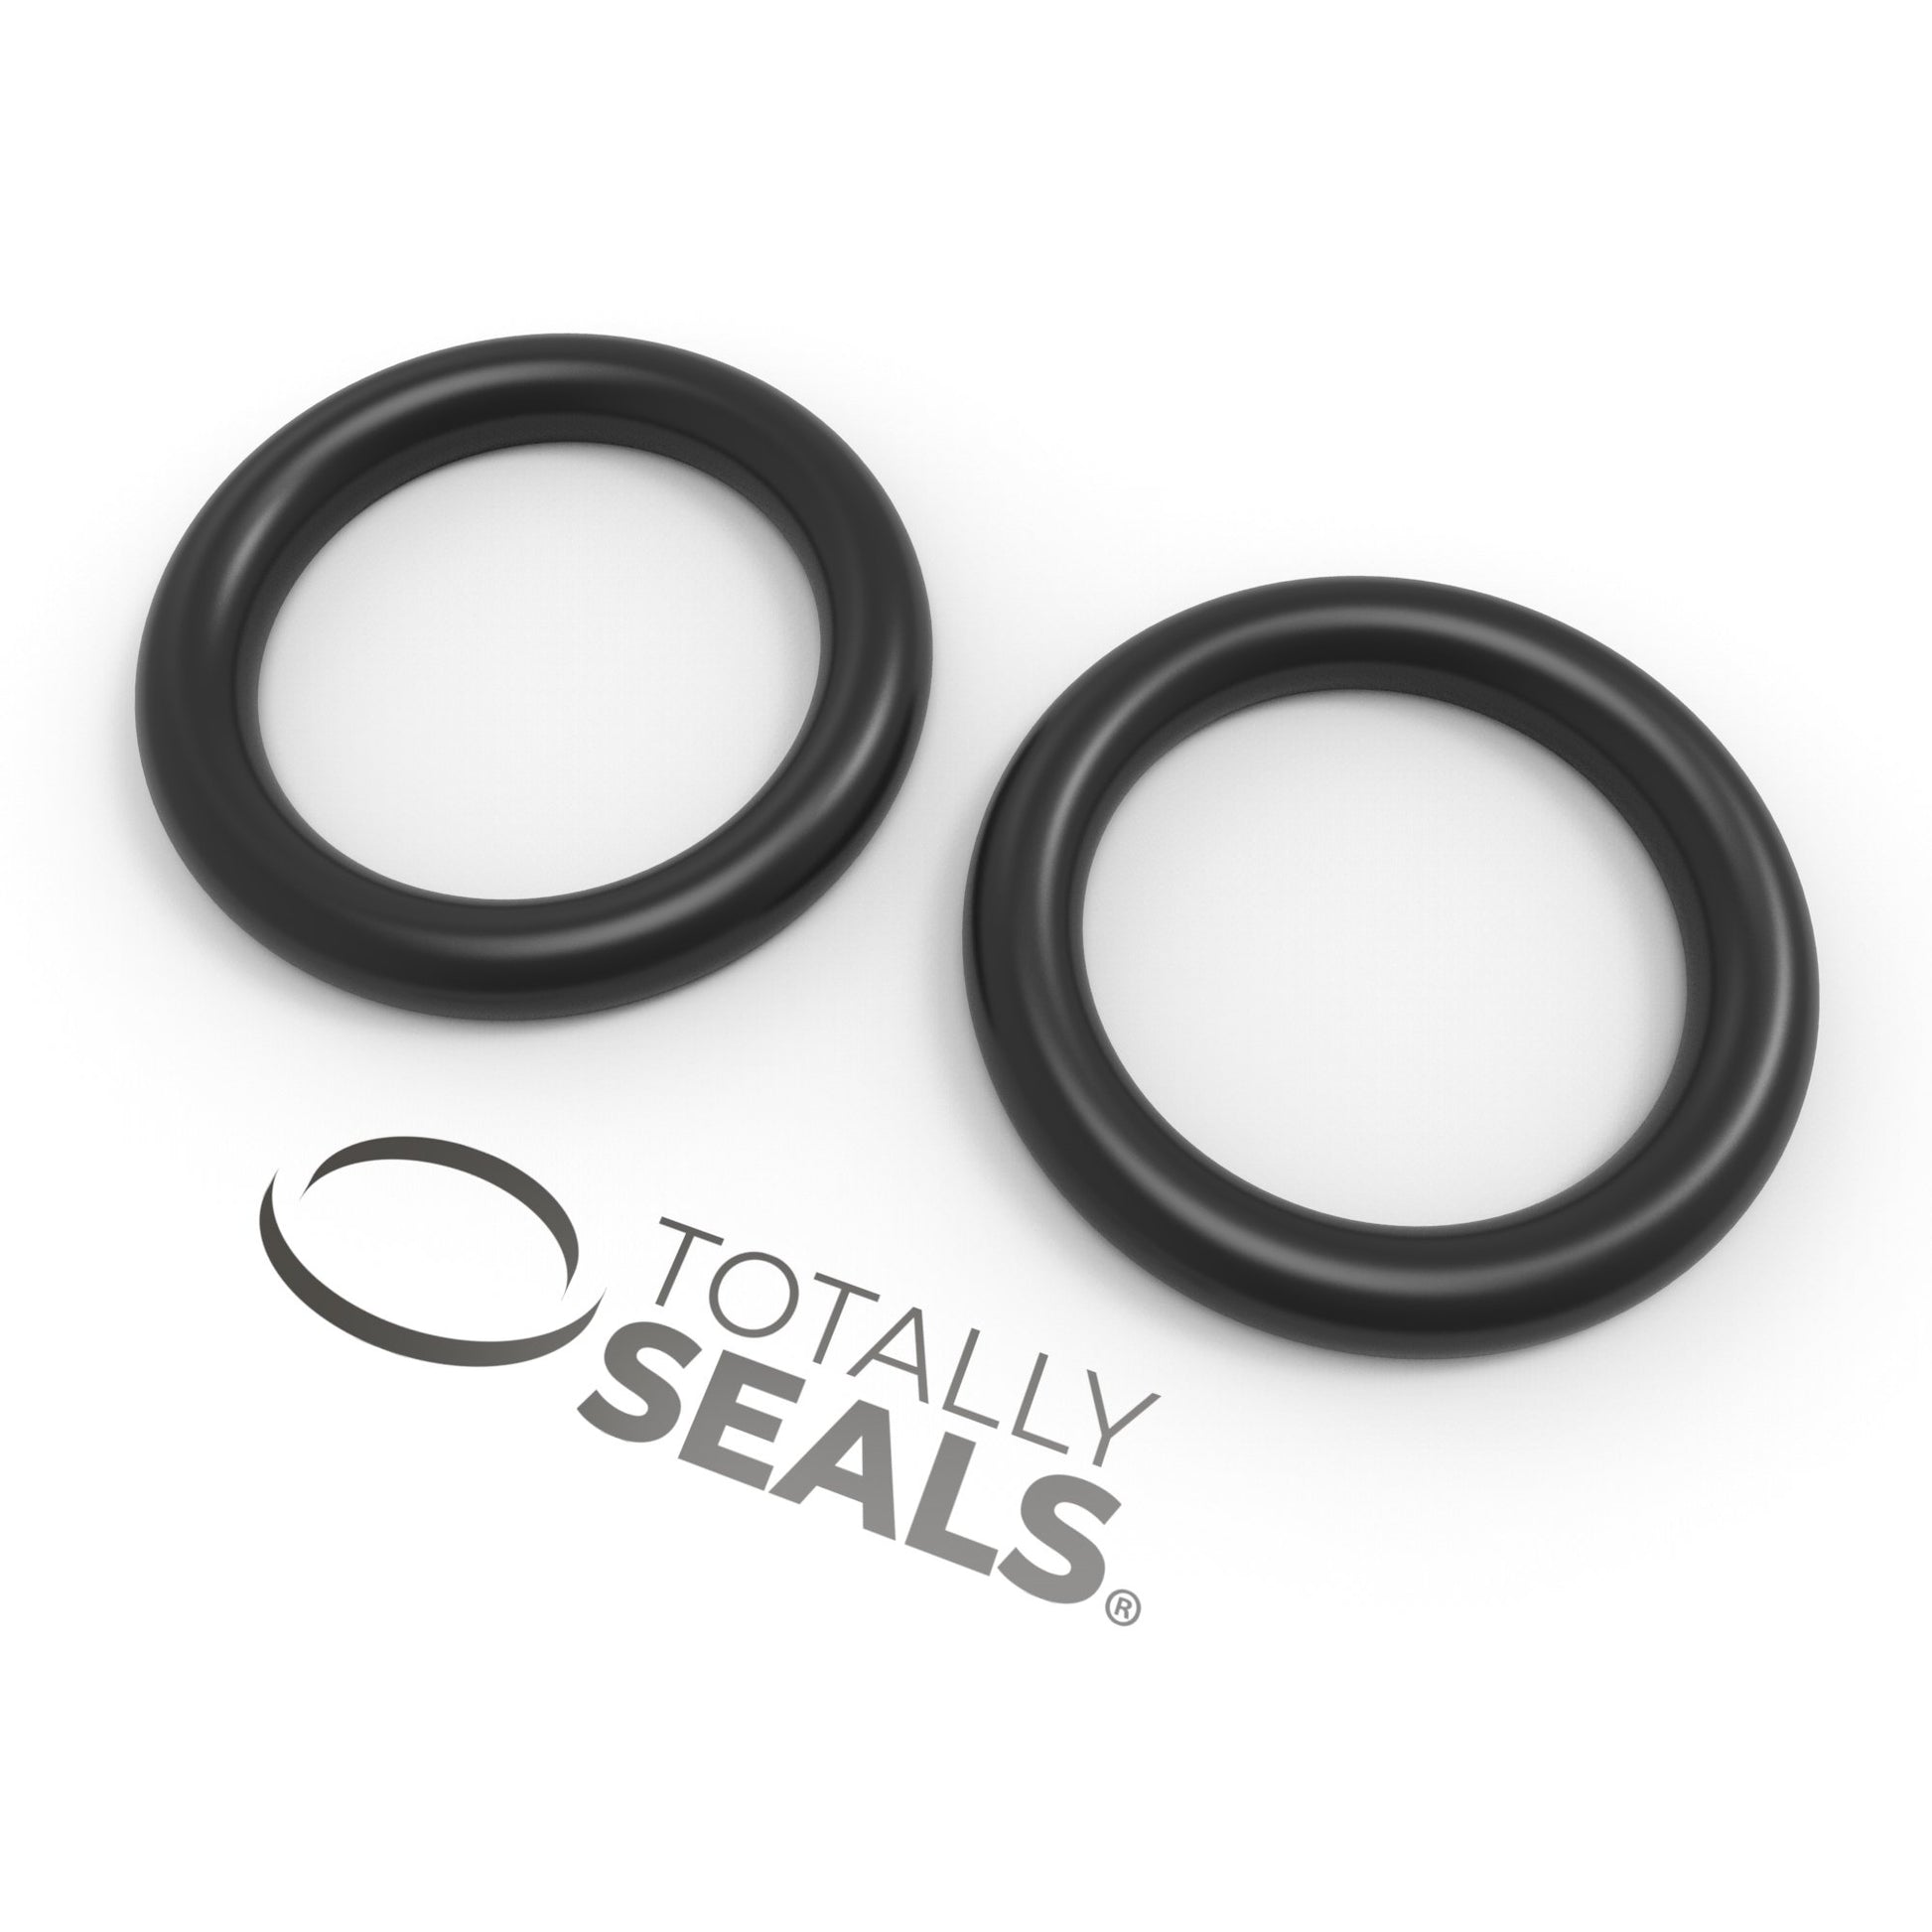 1 1/4" x 1/8" (BS218) Imperial Nitrile Rubber O-Rings - Totally Seals®